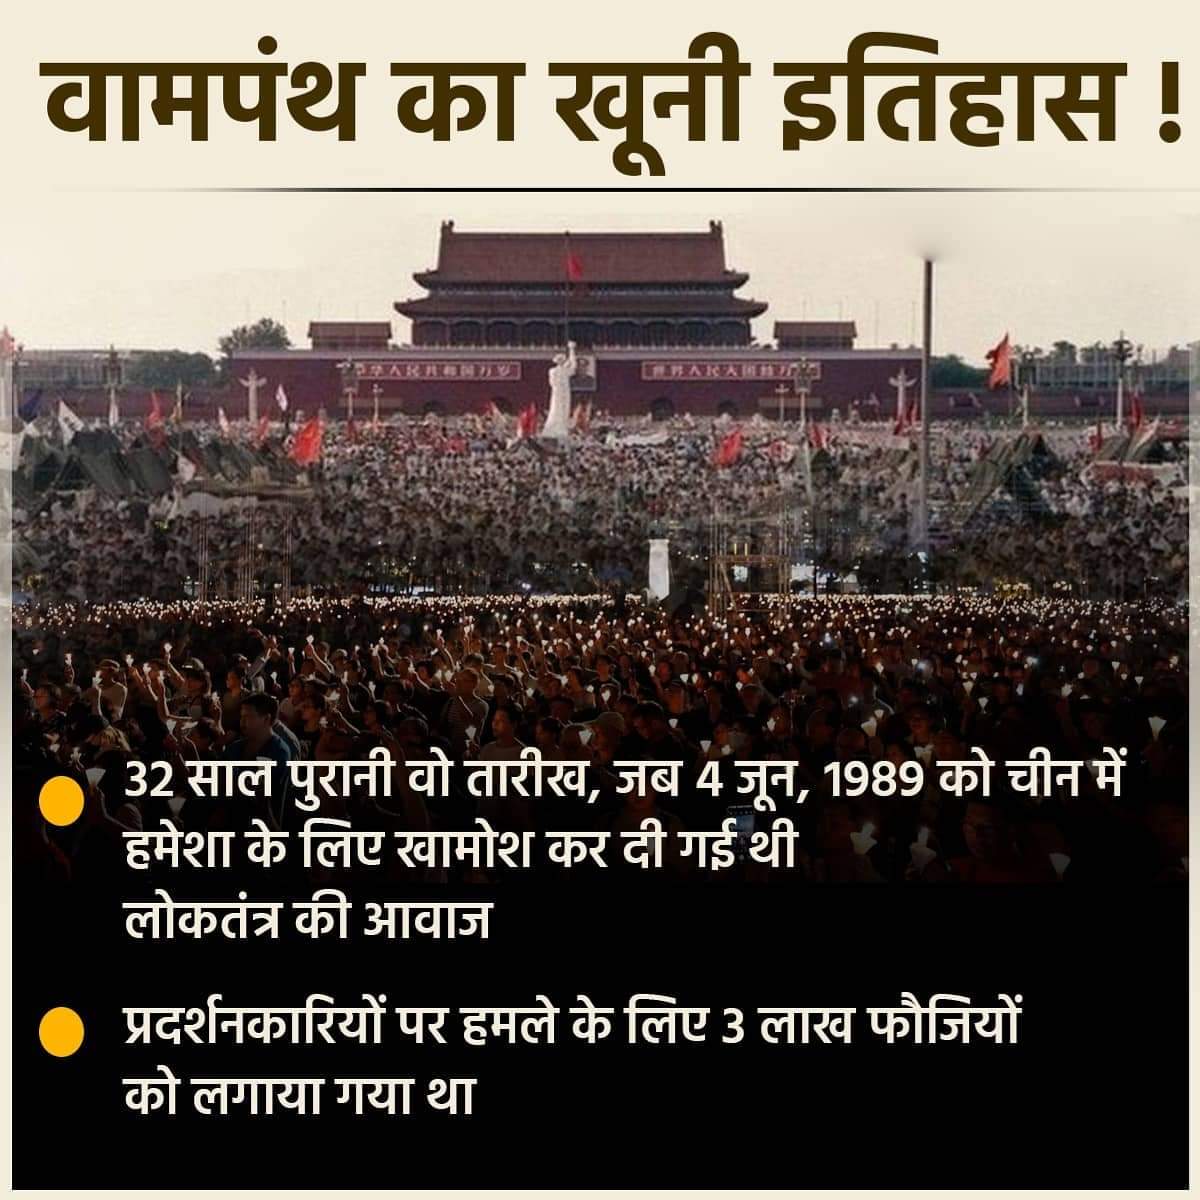 China got a tough challenge from India
Indian soldiers chased Chinese army in the border
Government bans Chinese apps
Indian people boycott Chinese goods ,,,।
#ChinaGlobalThreat 
#ChinaLiedMillionsDied 
#चीनी_वायरस_से_विश्व_बर्बाद